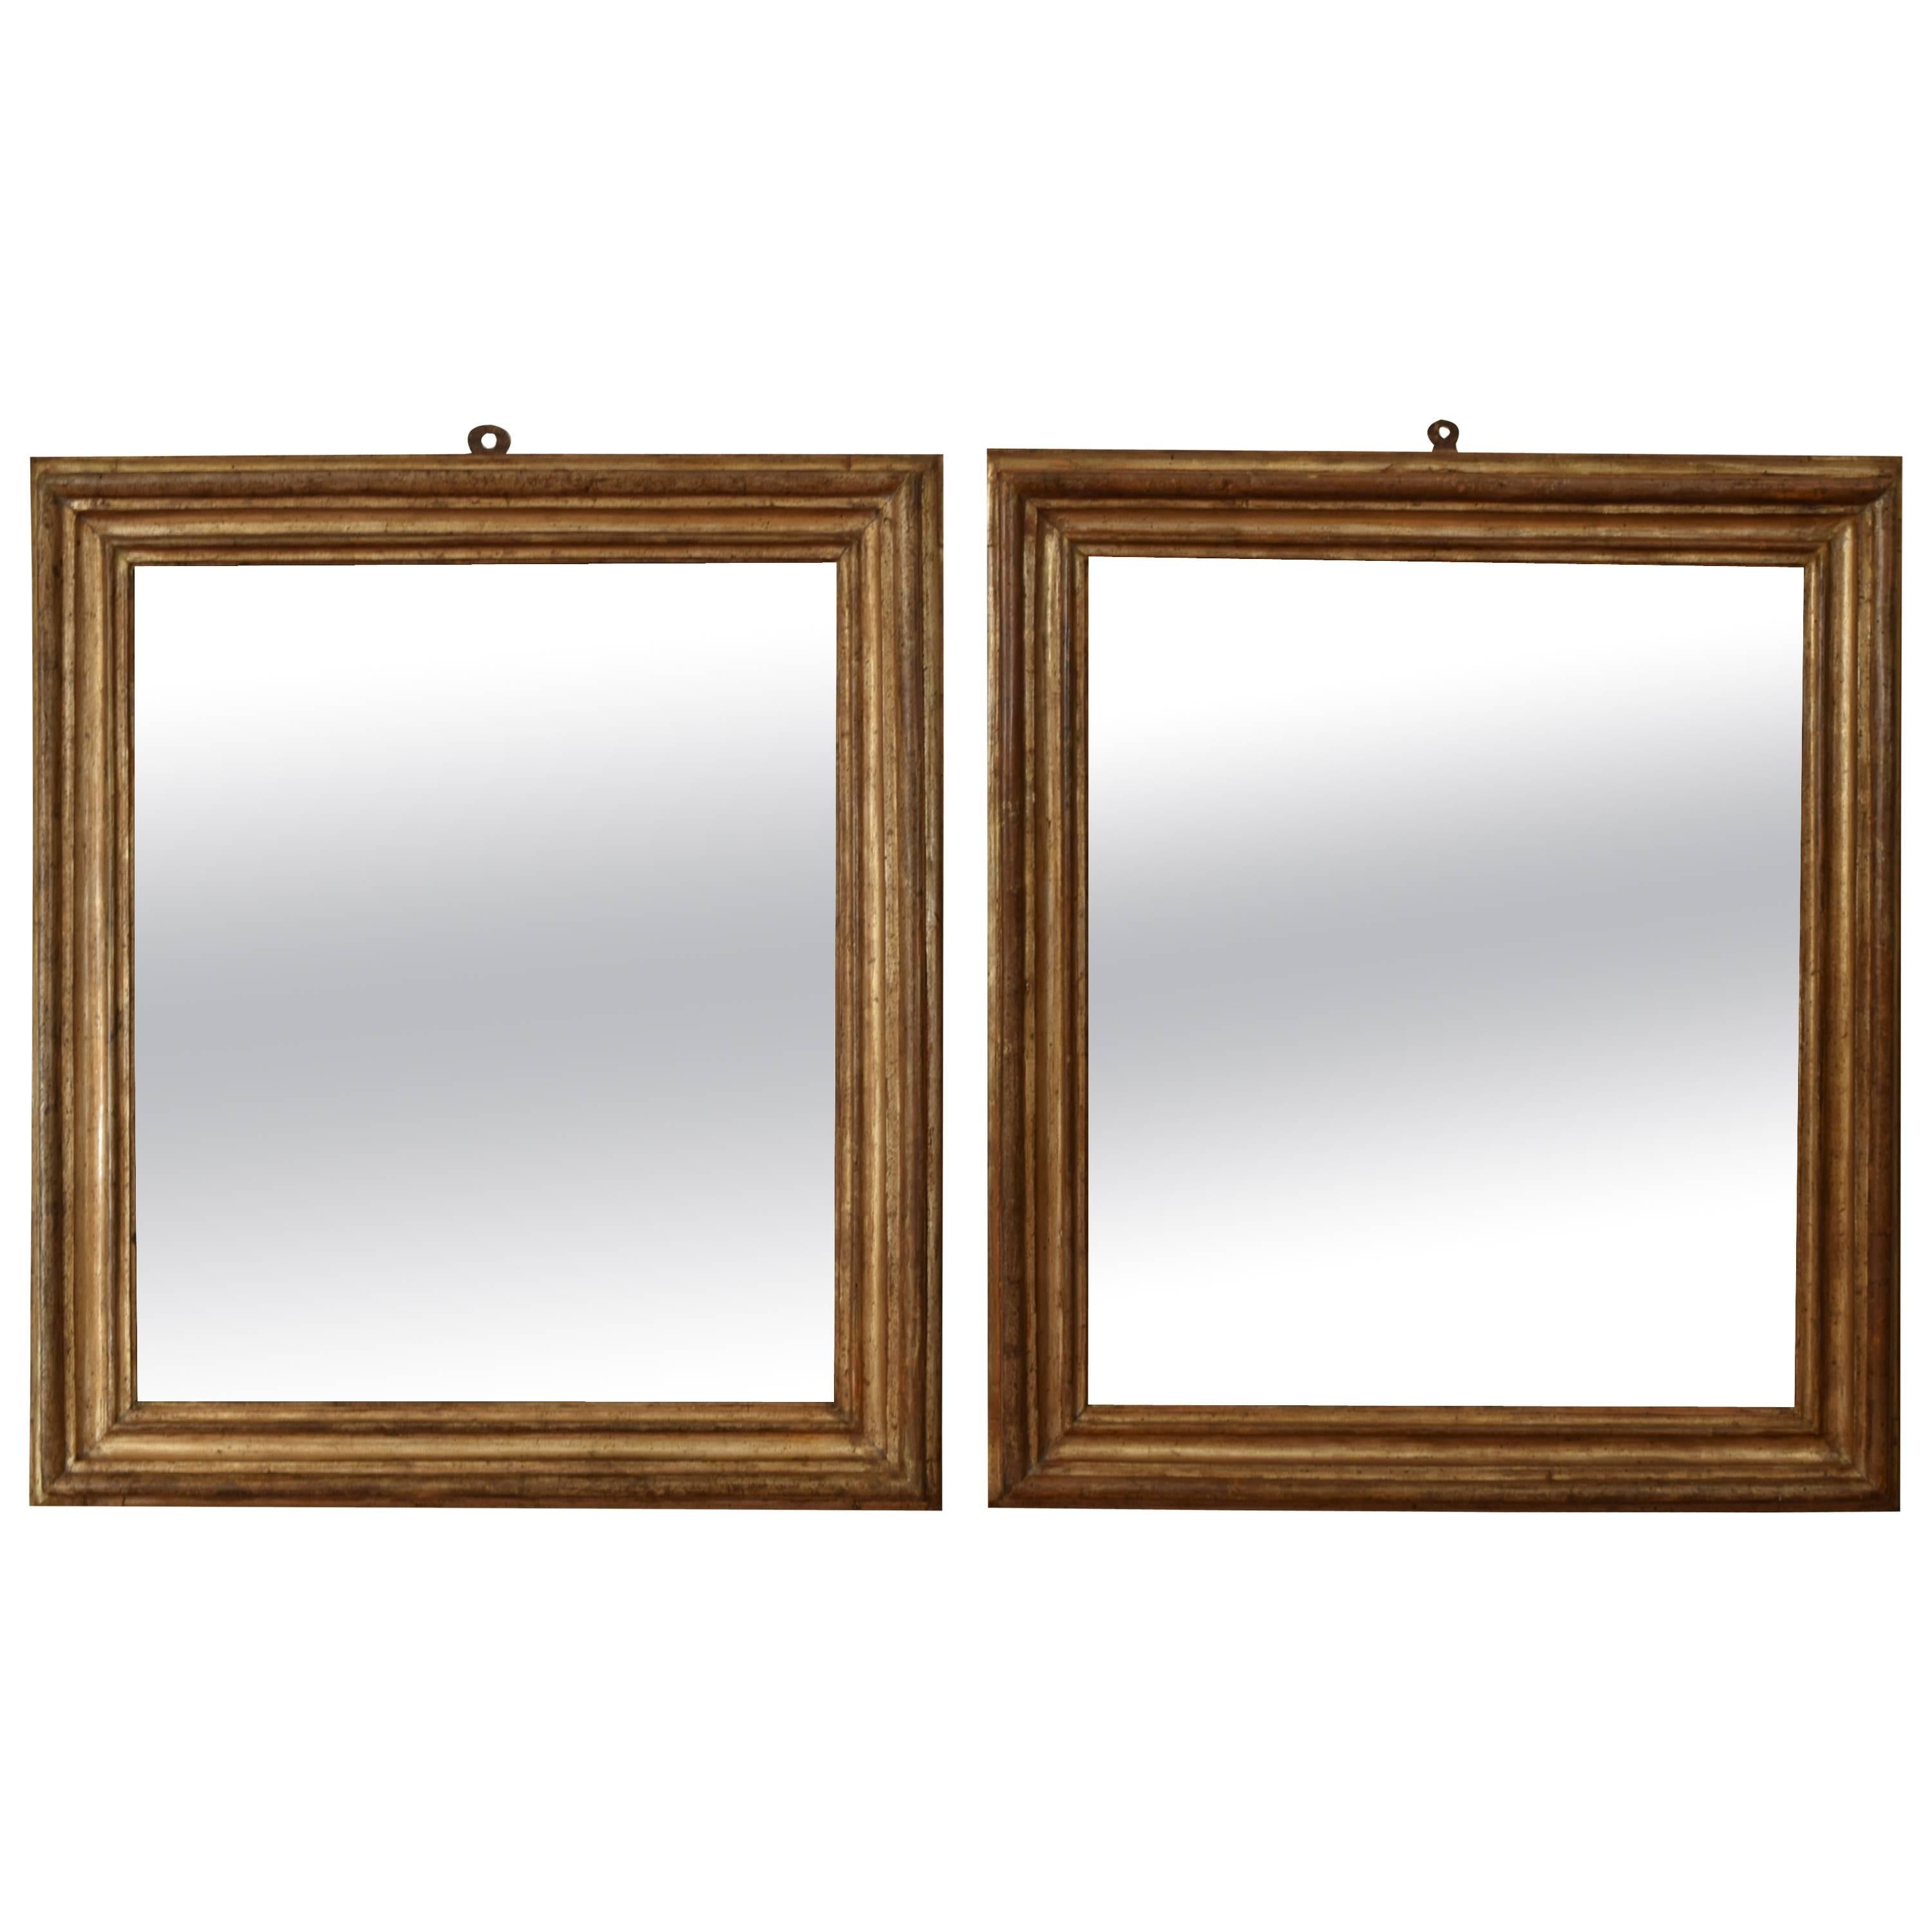 Pair of Italian Late Baroque Silvered Giltwood Frames as Mirrors